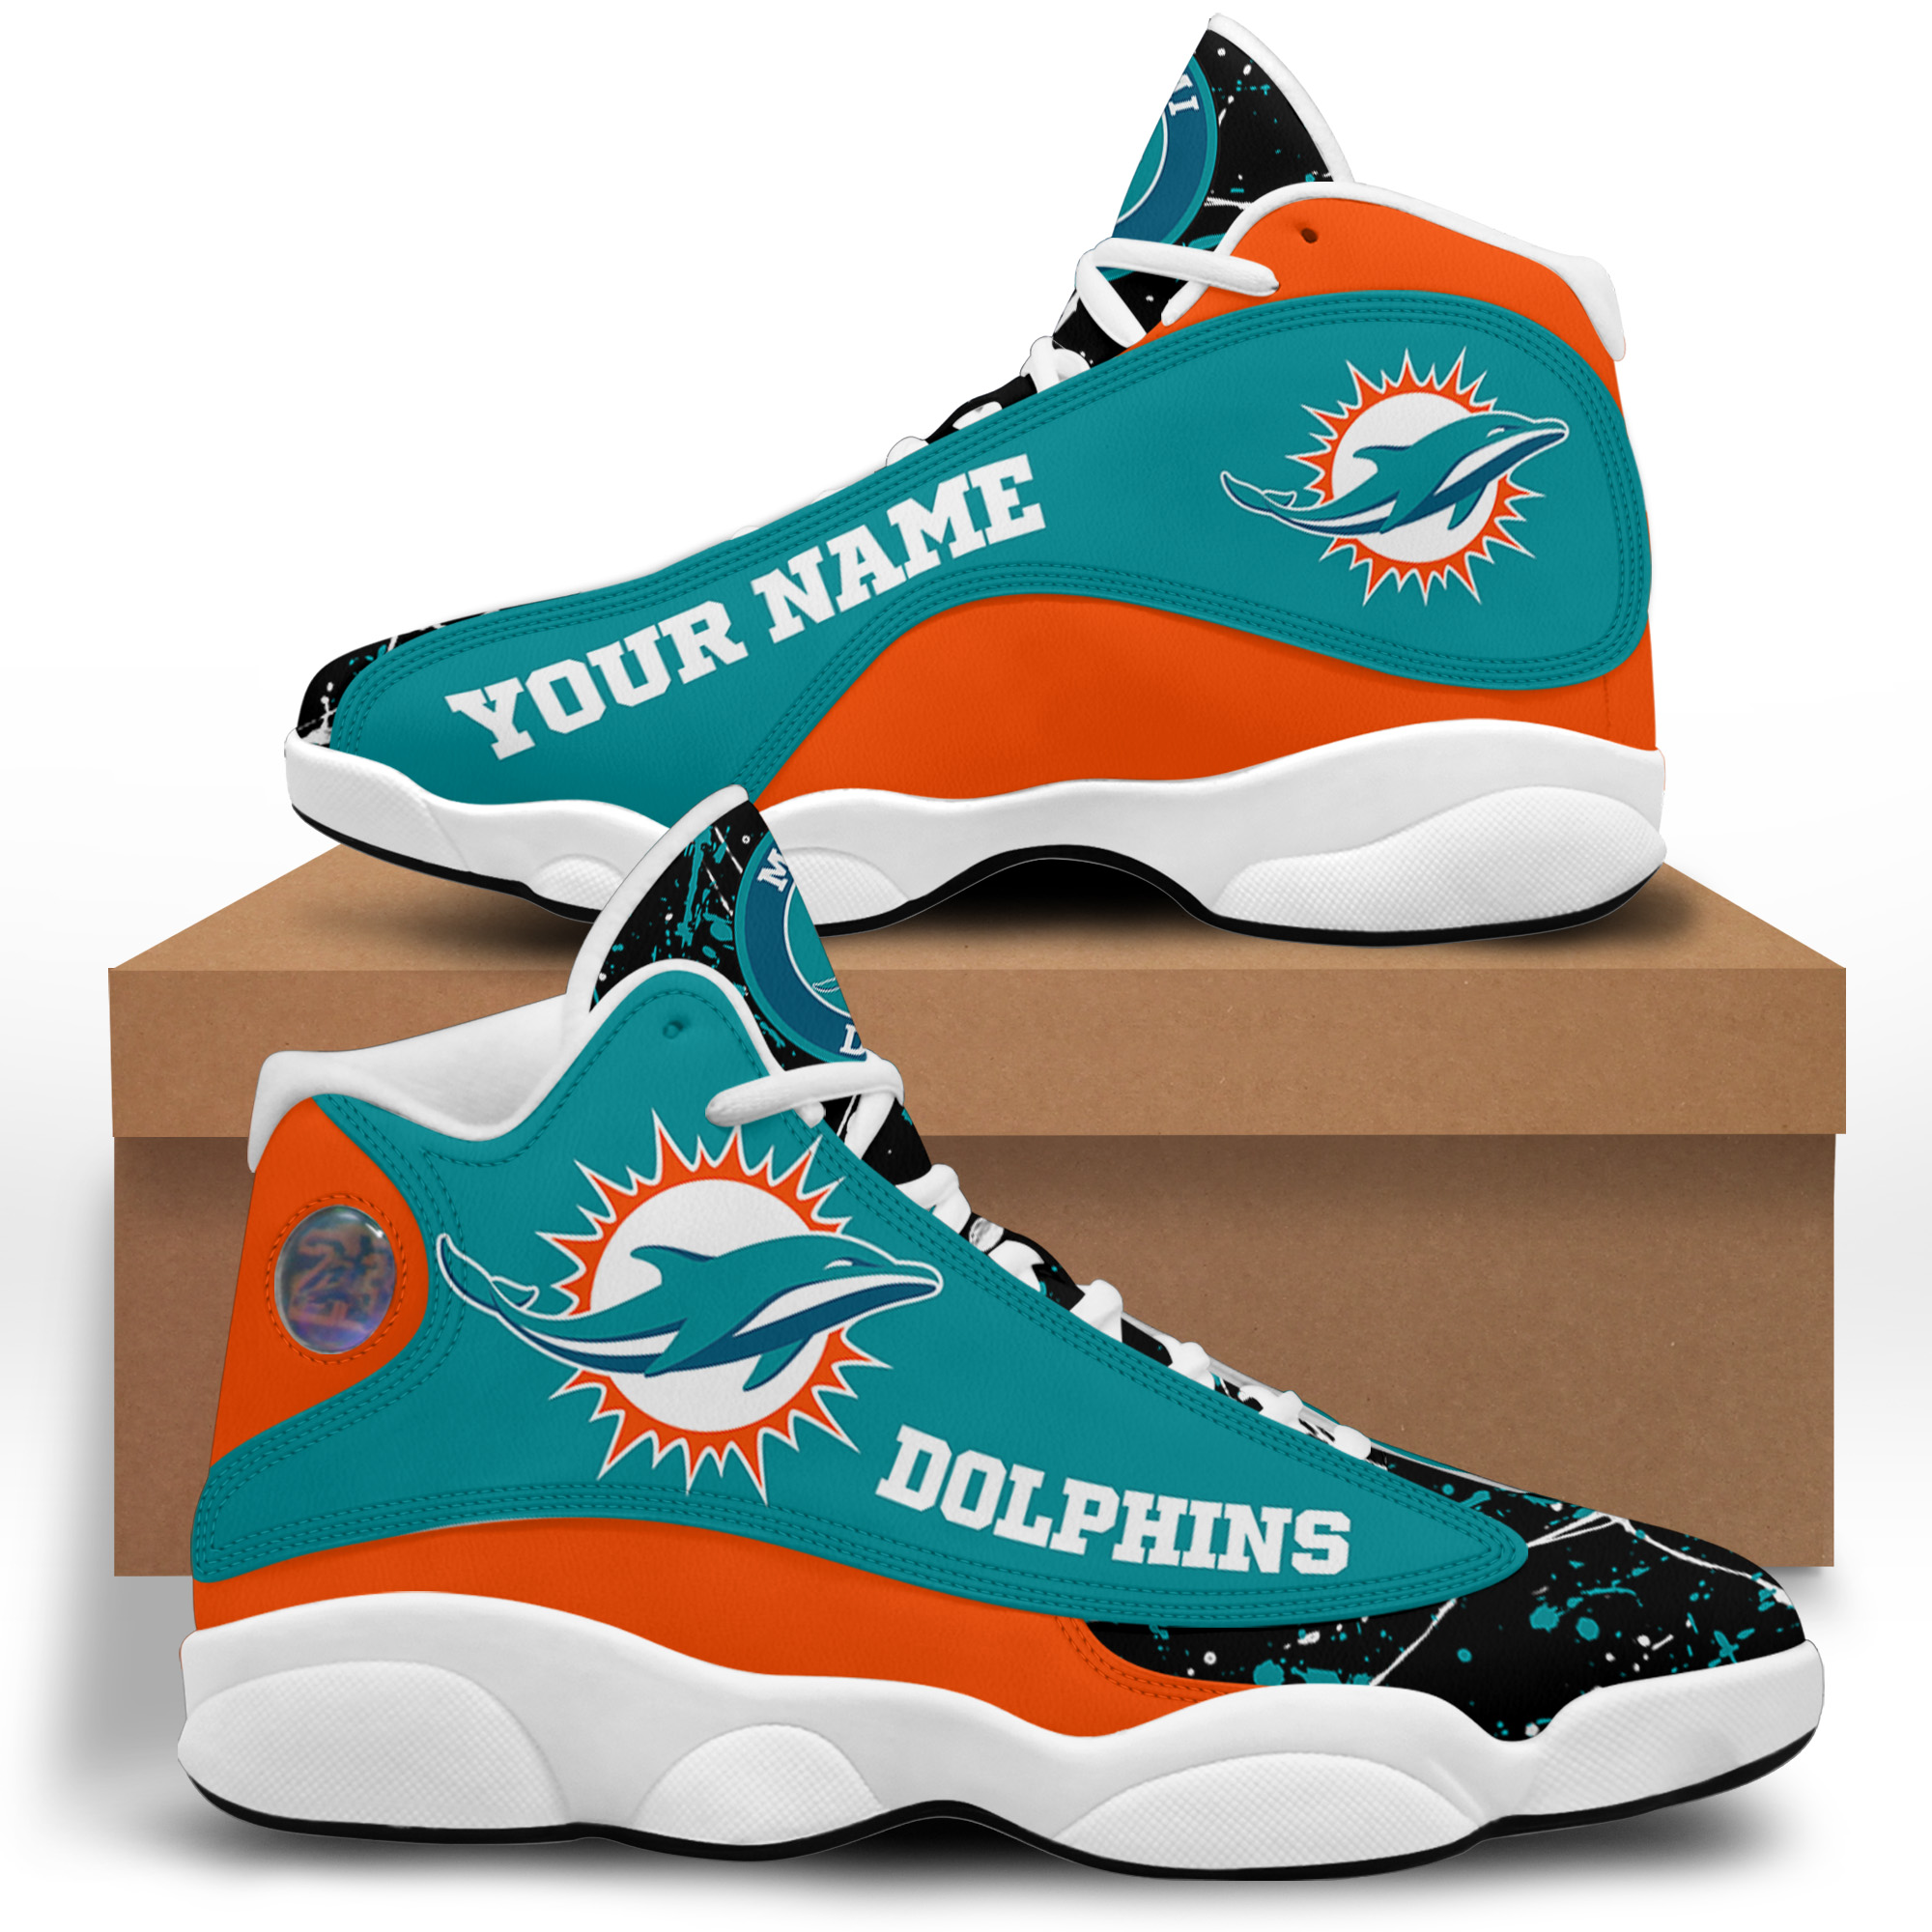 NFL Personalized Your Name Miami Dolphins Air Jordan 13 Shoes - White